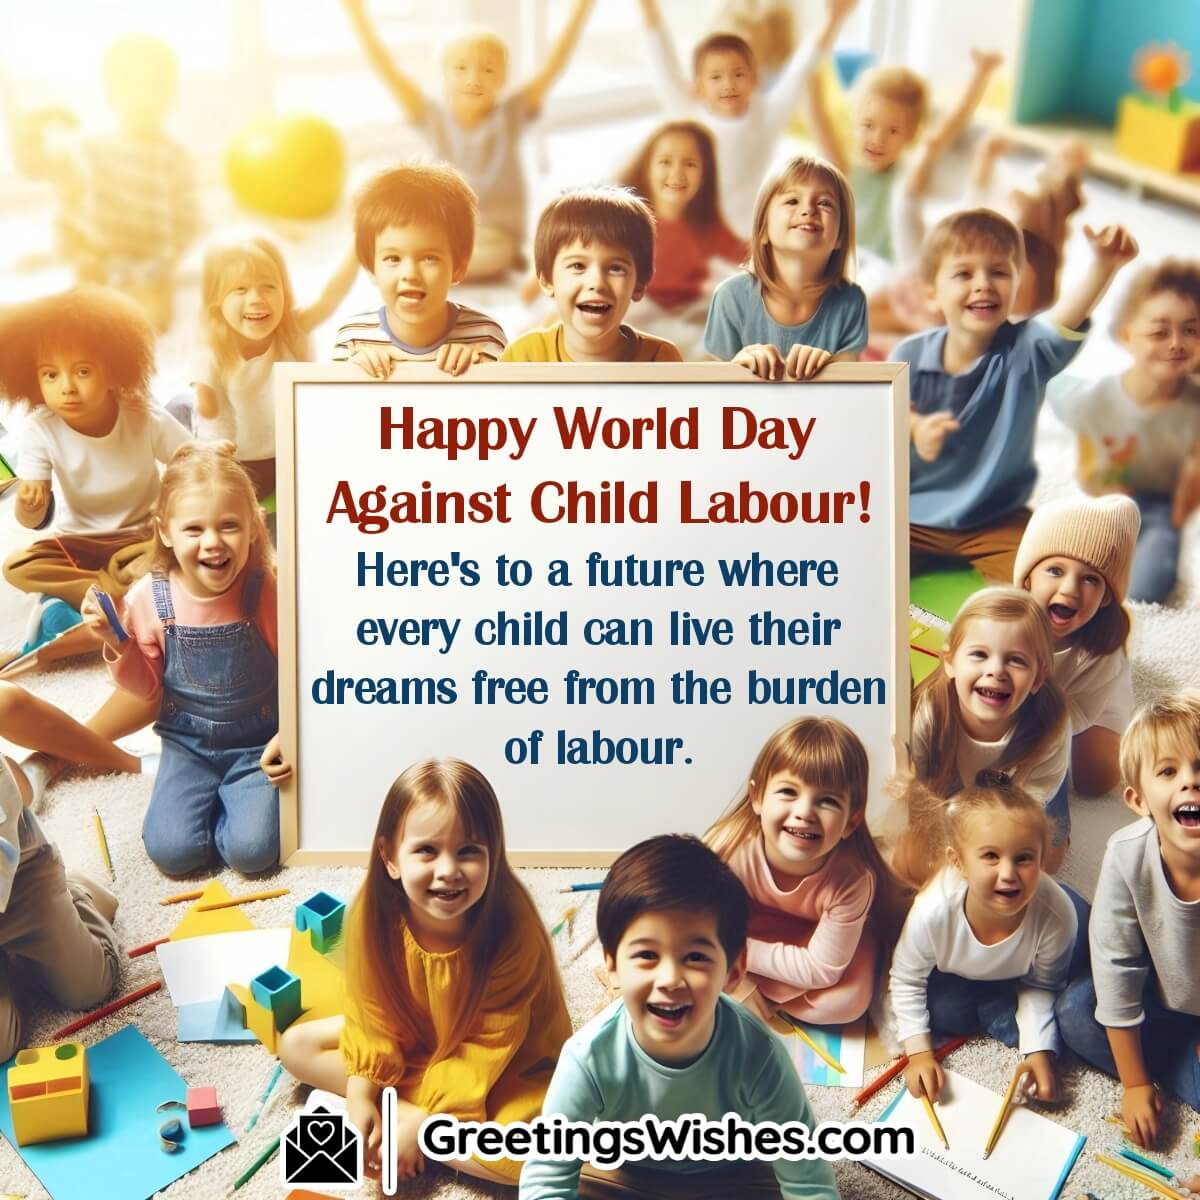 World Day Against Child Labour Wishes (12 June)